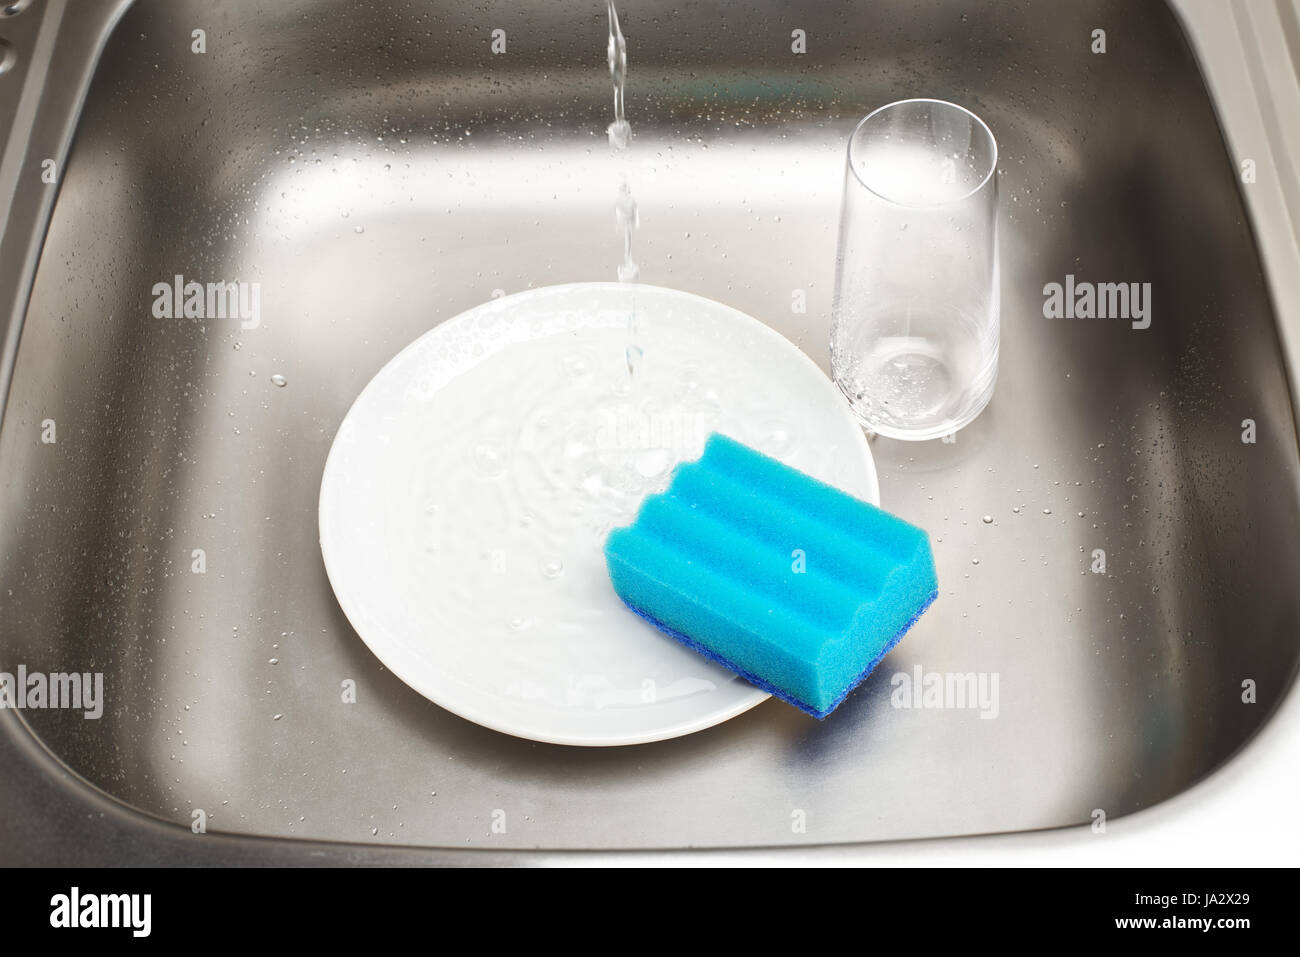 https://c8.alamy.com/comp/JA2X29/close-up-of-kitchen-sink-with-clean-white-plate-blue-cleaning-sponge-JA2X29.jpg